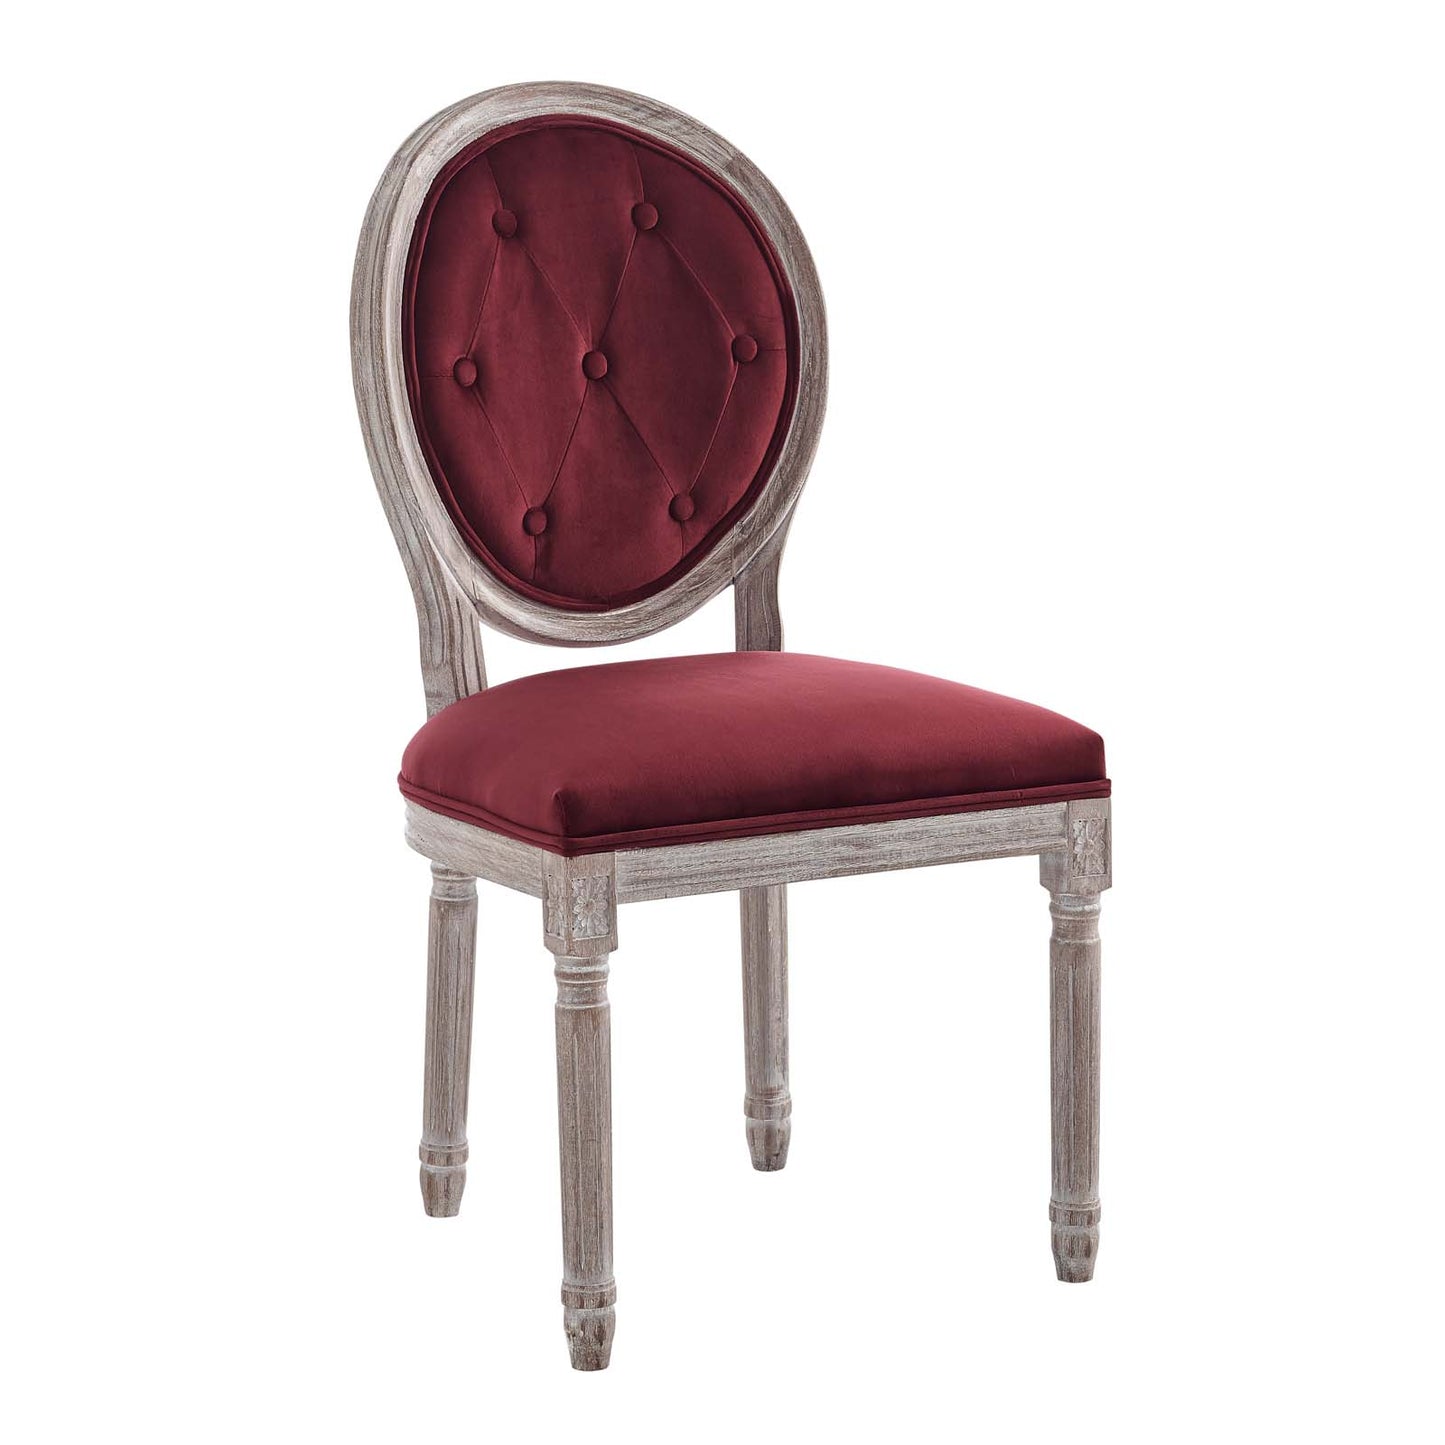 Arise Vintage French Performance Velvet Dining Side Chair Natural Maroon EEI-4665-NAT-MAR